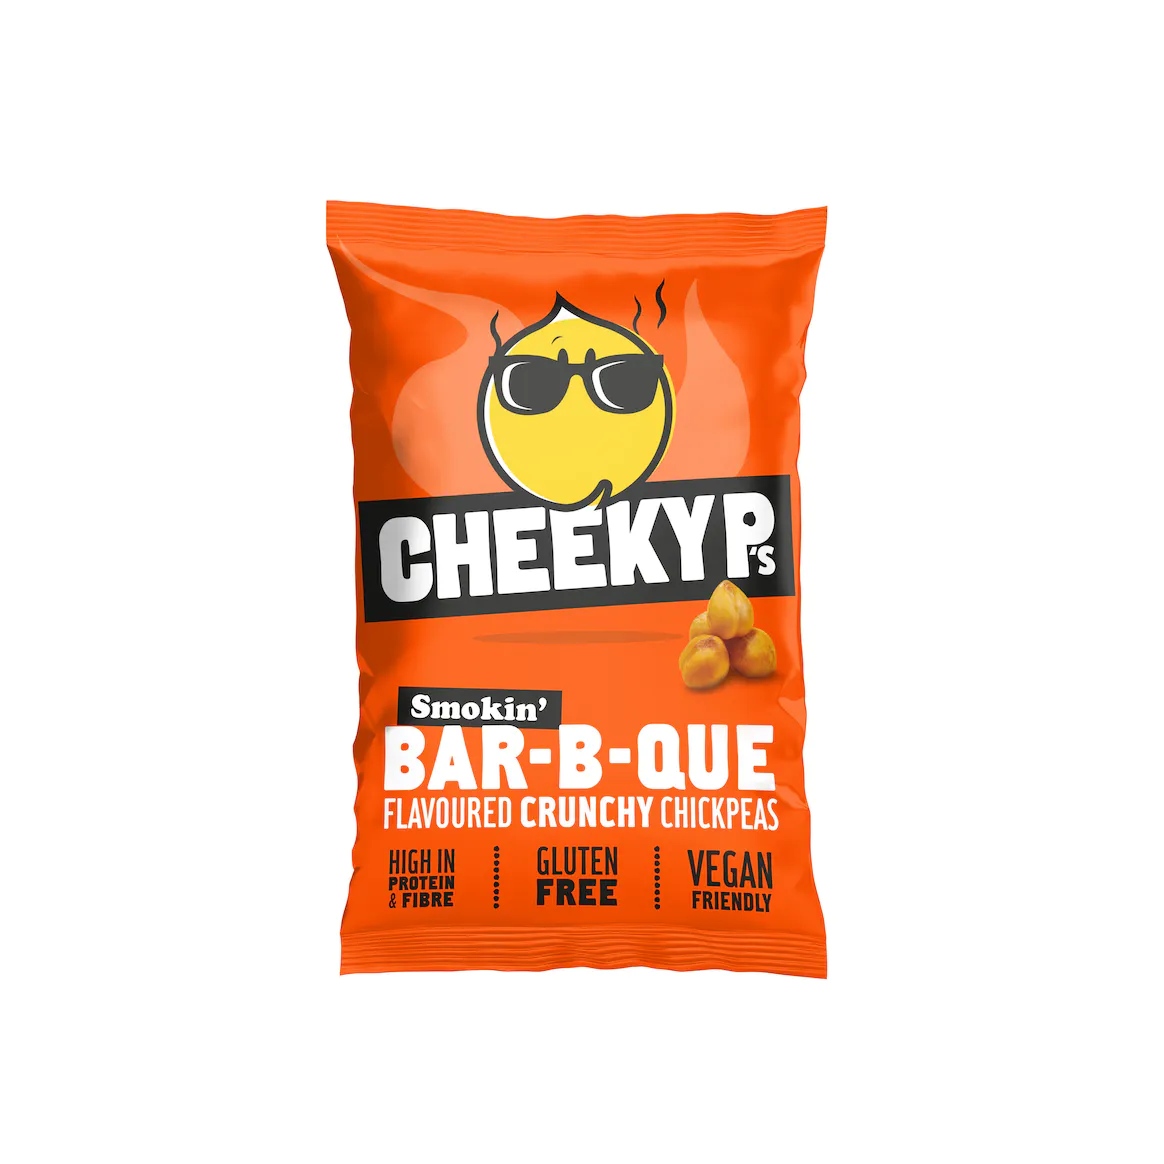 Cheeky P BBQ Roasted Chickpeas were in our January box to help Veganuary start off right..

#veganuary #veganuary23 #veganuary2023 #roastedchickpeas #bbqsnacks #crunchychickpeas #monthlysubscriptionbox